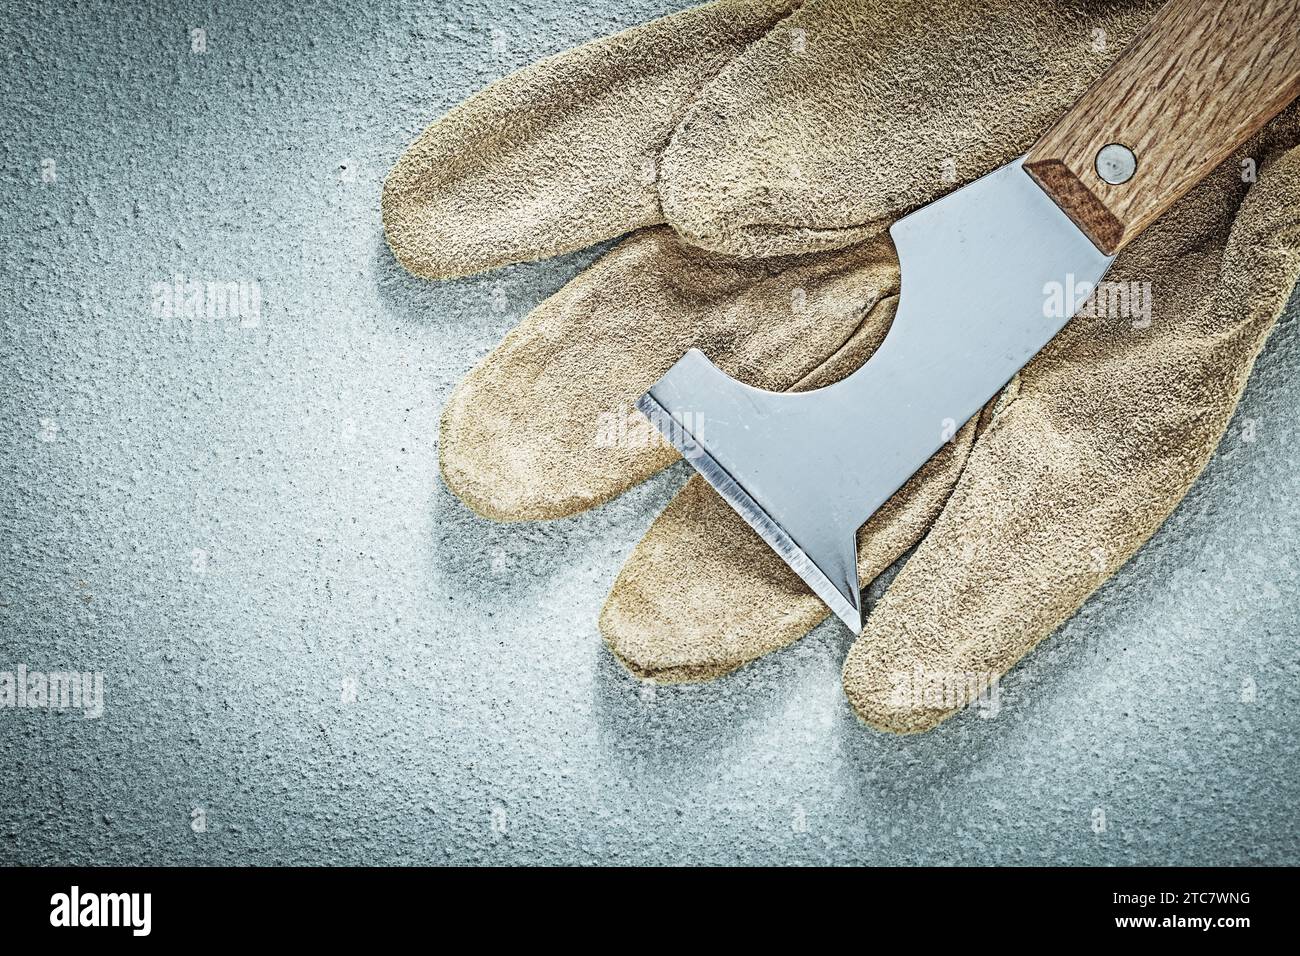 Plastering trowel protective gloves on concrete surface construction concept Stock Photo